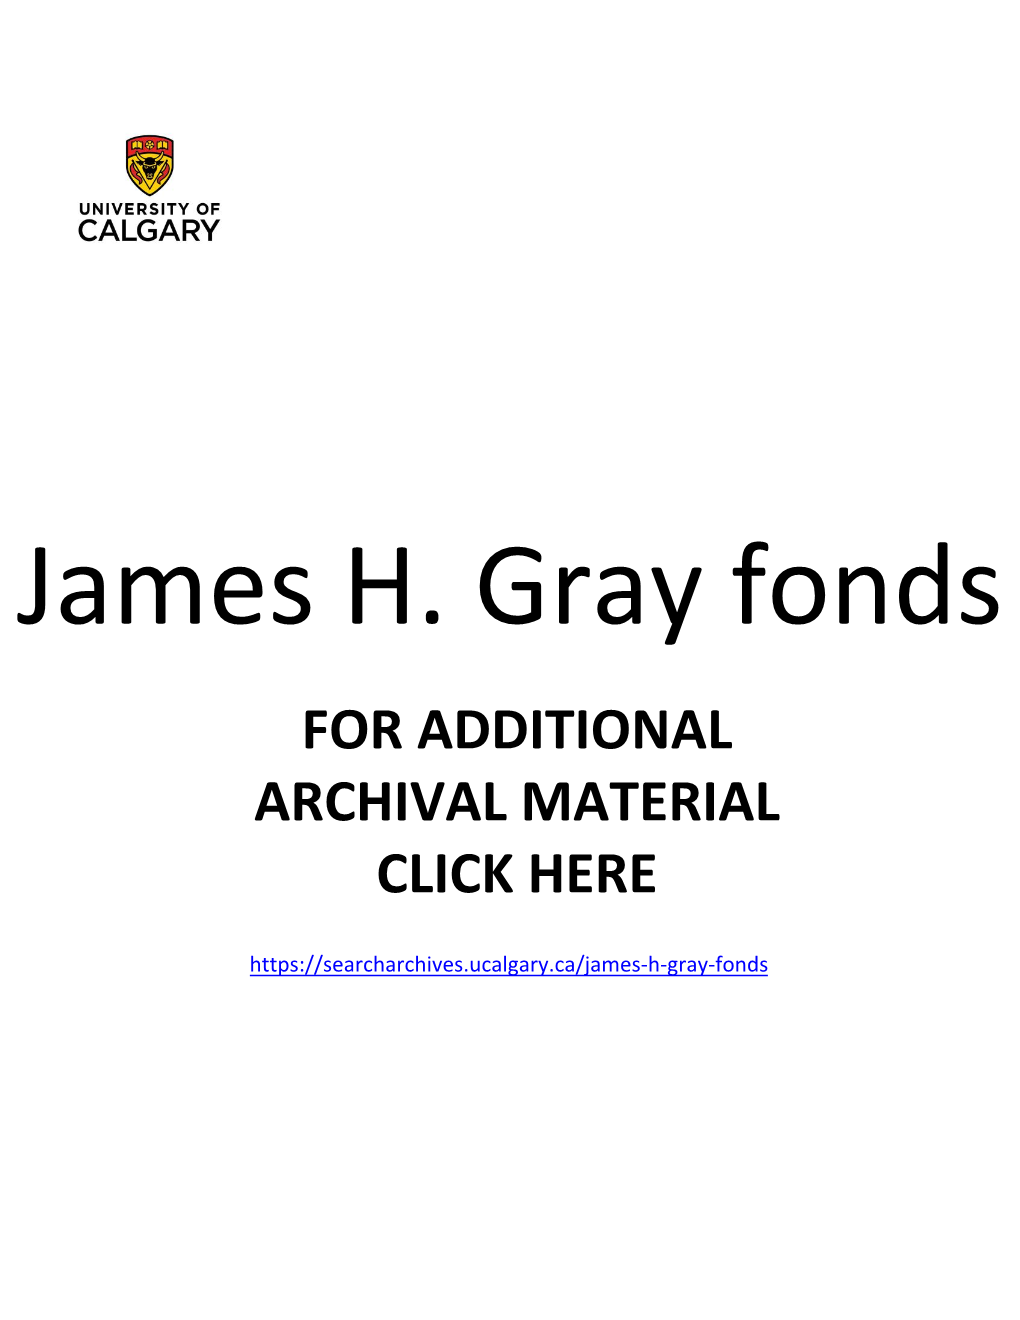 James H. Gray Fonds for ADDITIONAL ARCHIVAL MATERIAL CLICK HERE